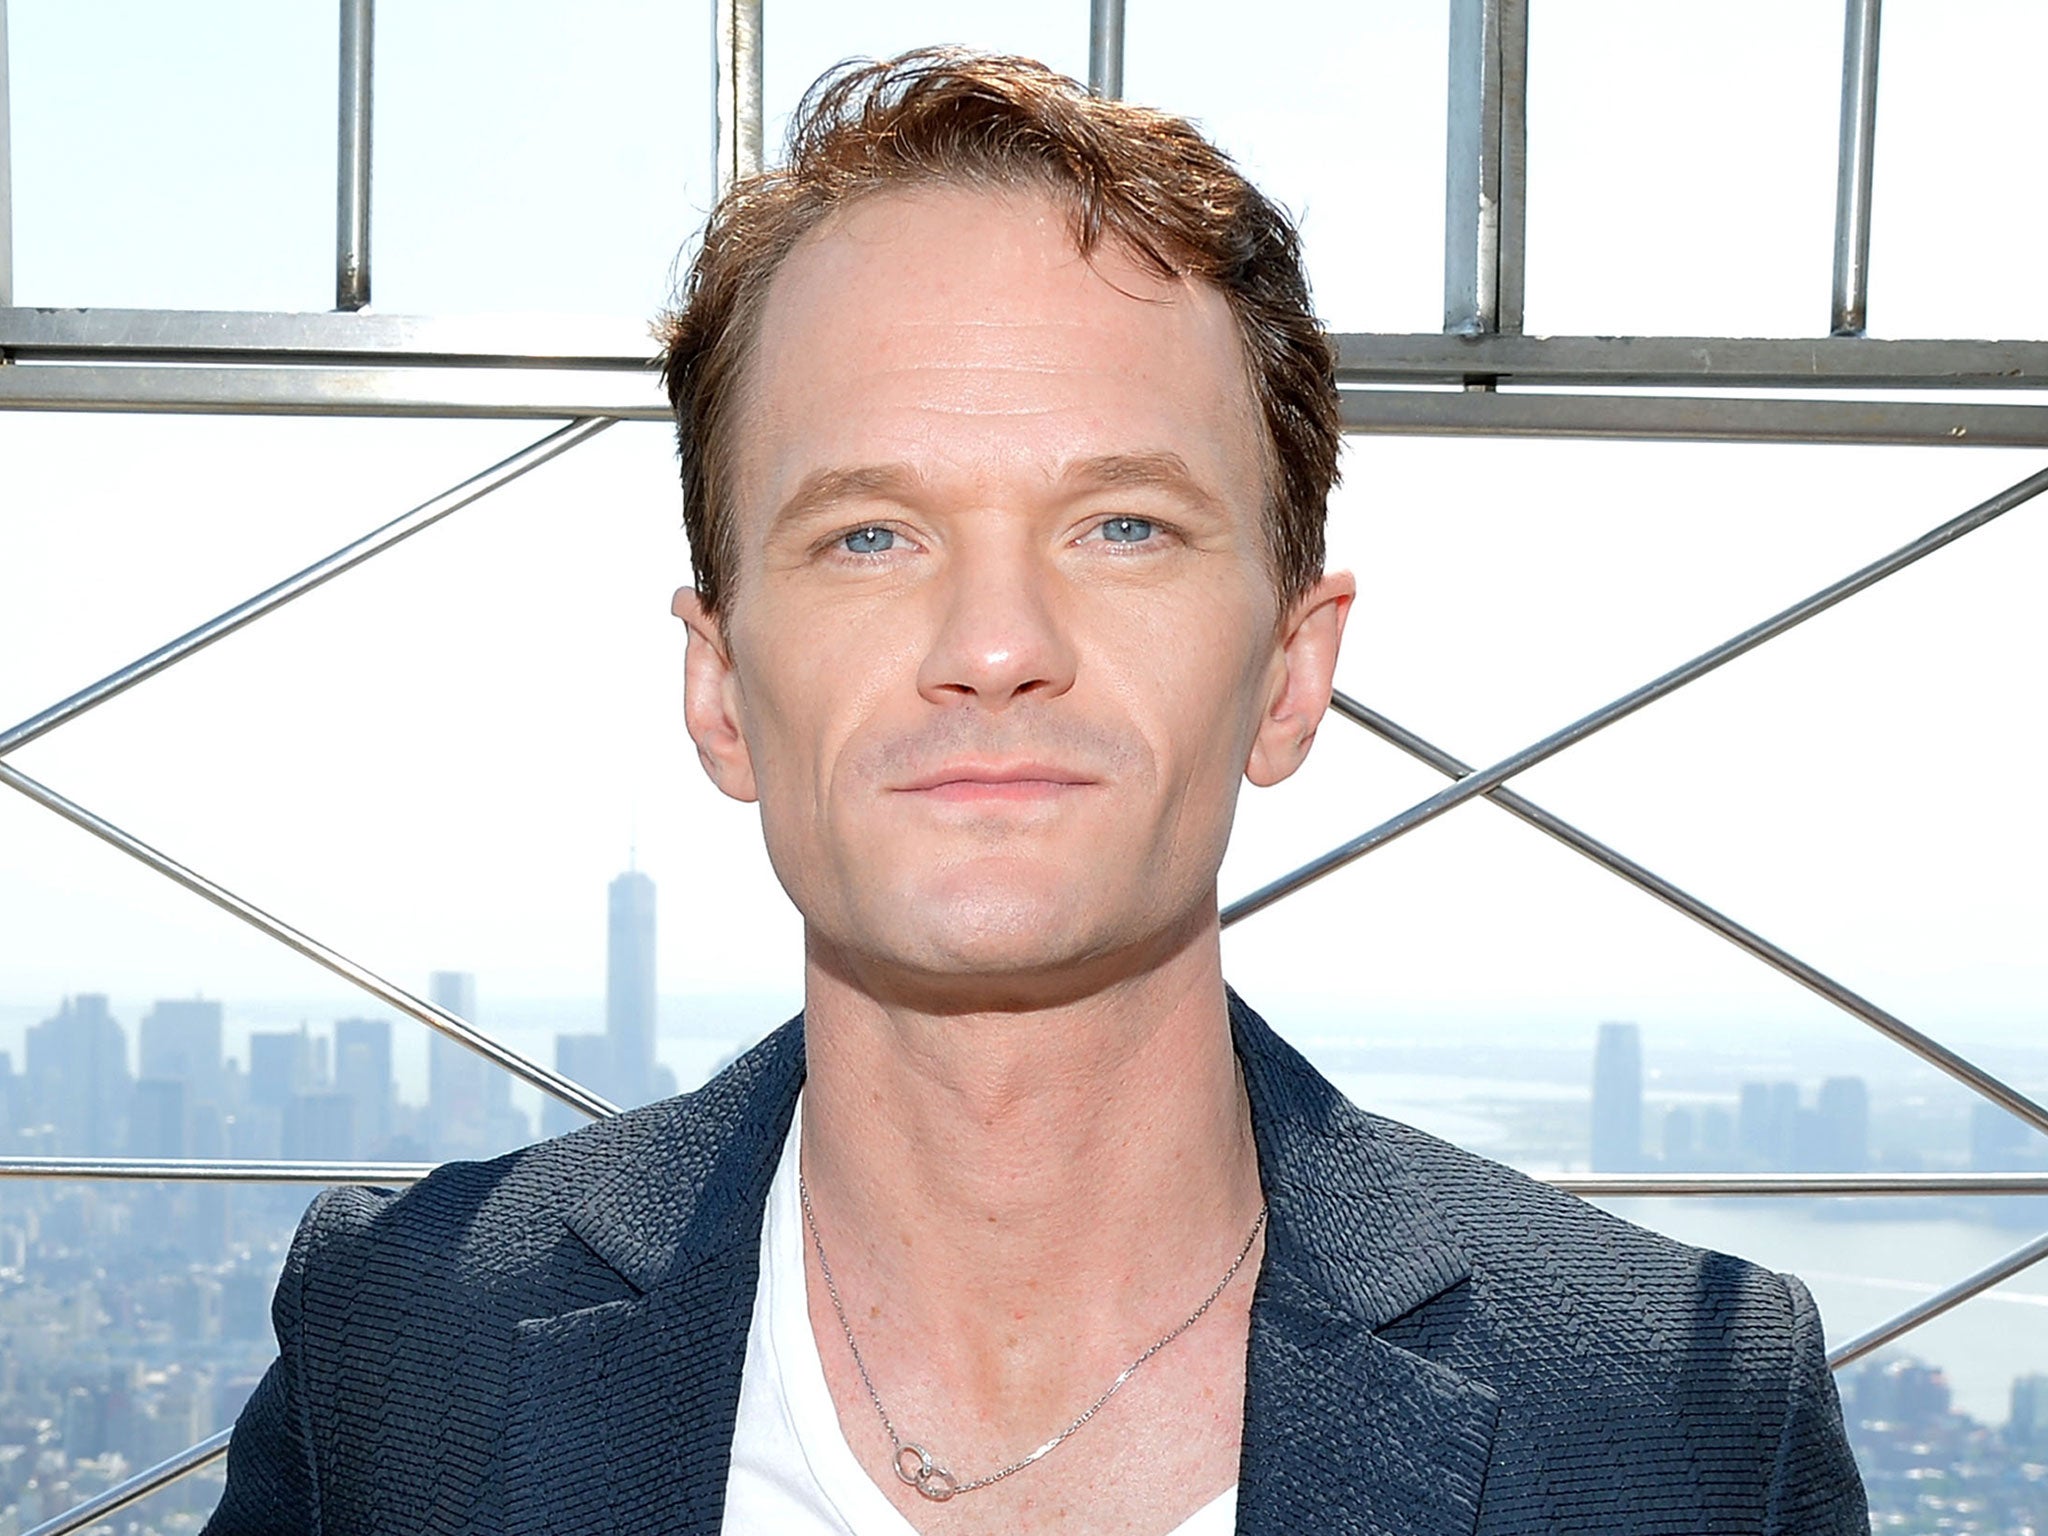 Neil Patrick Harris will host his new variety show in New York